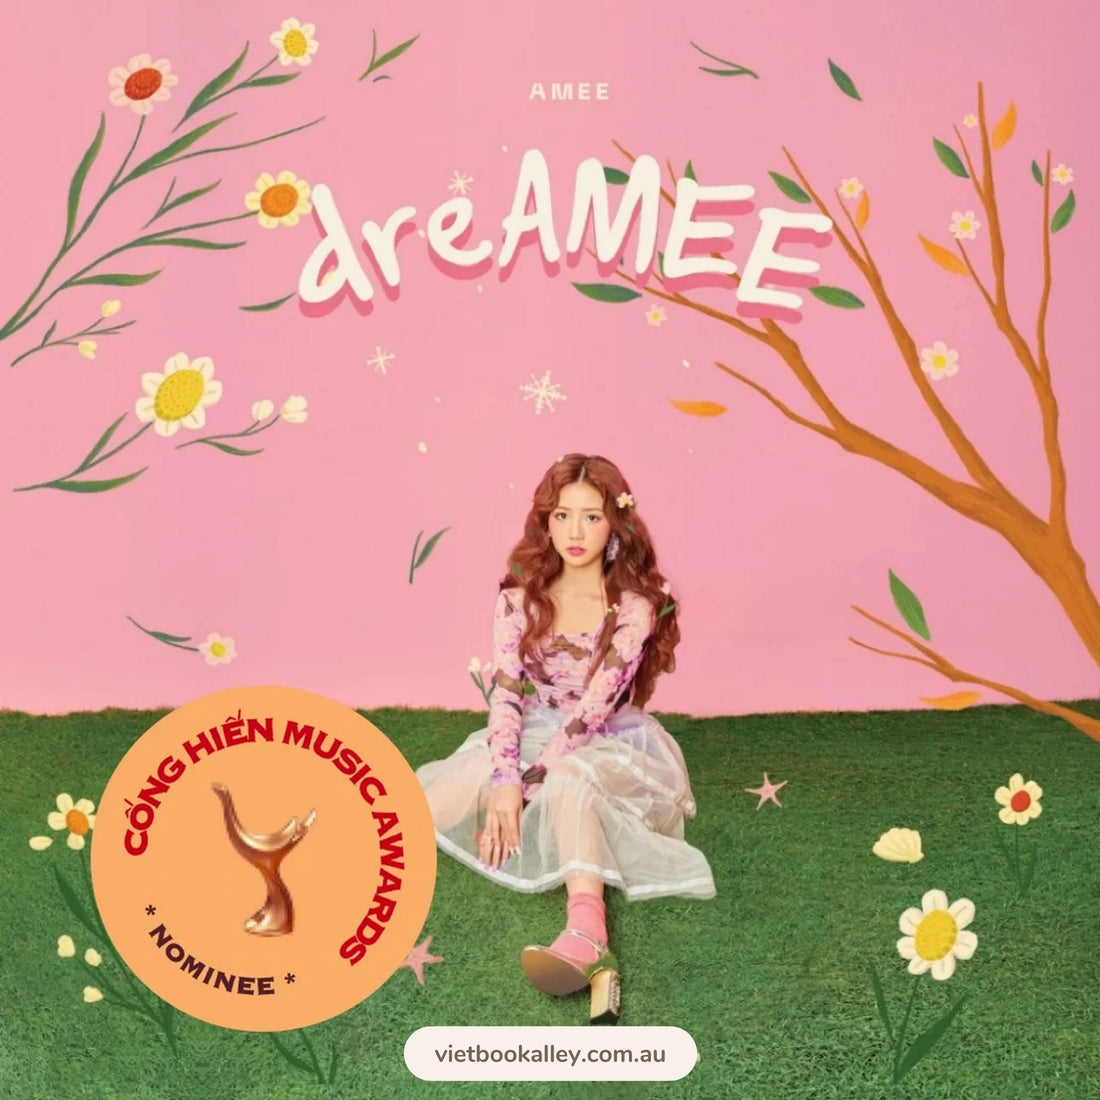 AMEE - DREAMEE (CD & SIGNED BOOKLET)